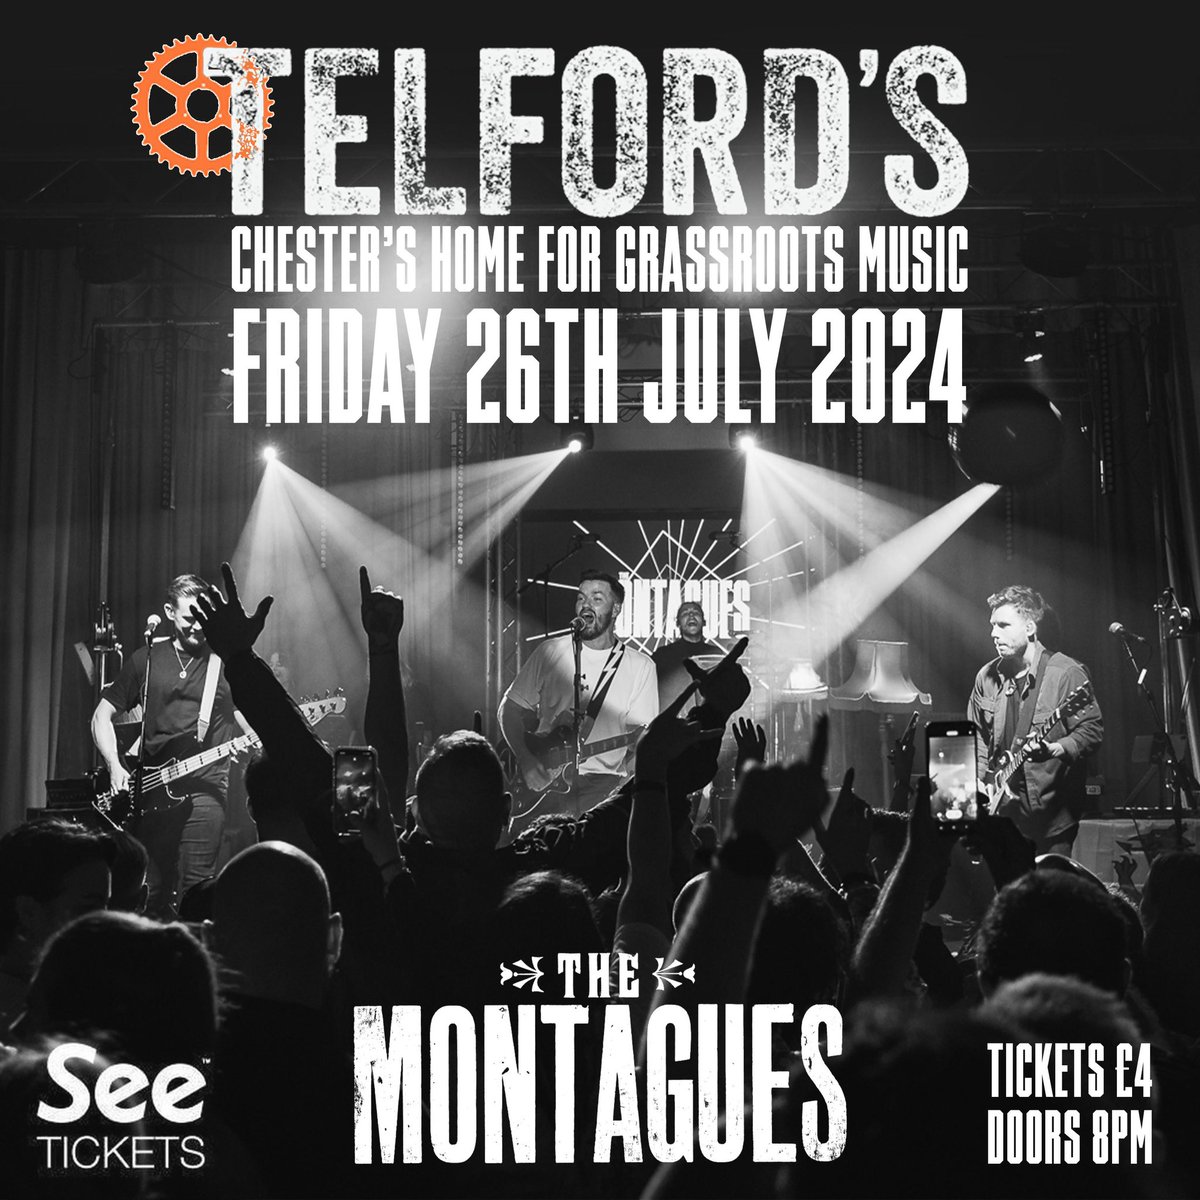 🚨TELFORD’S WAREHOUSE 🚨

We’re excited to announce that we return to Telford’s Warehouse on Friday 26th July. 

🎟️ Tickets can be found in our bio.

New material anyone 👀 ™️